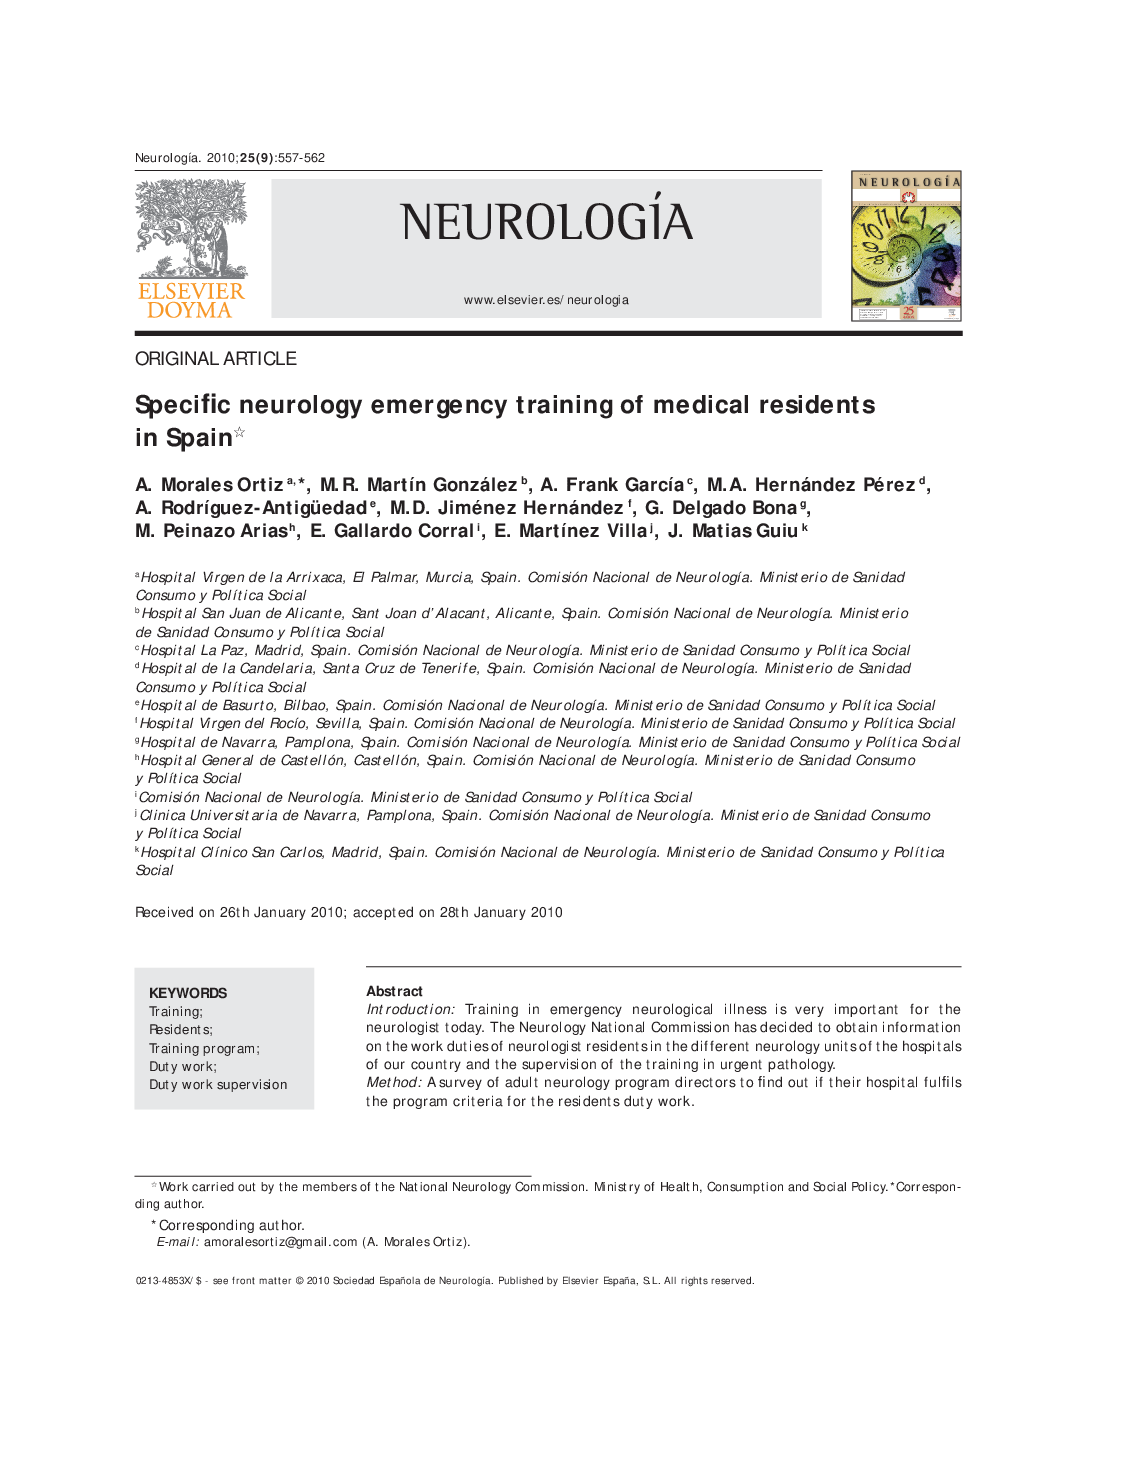 Specific neurology emergency training of medical residents in Spain